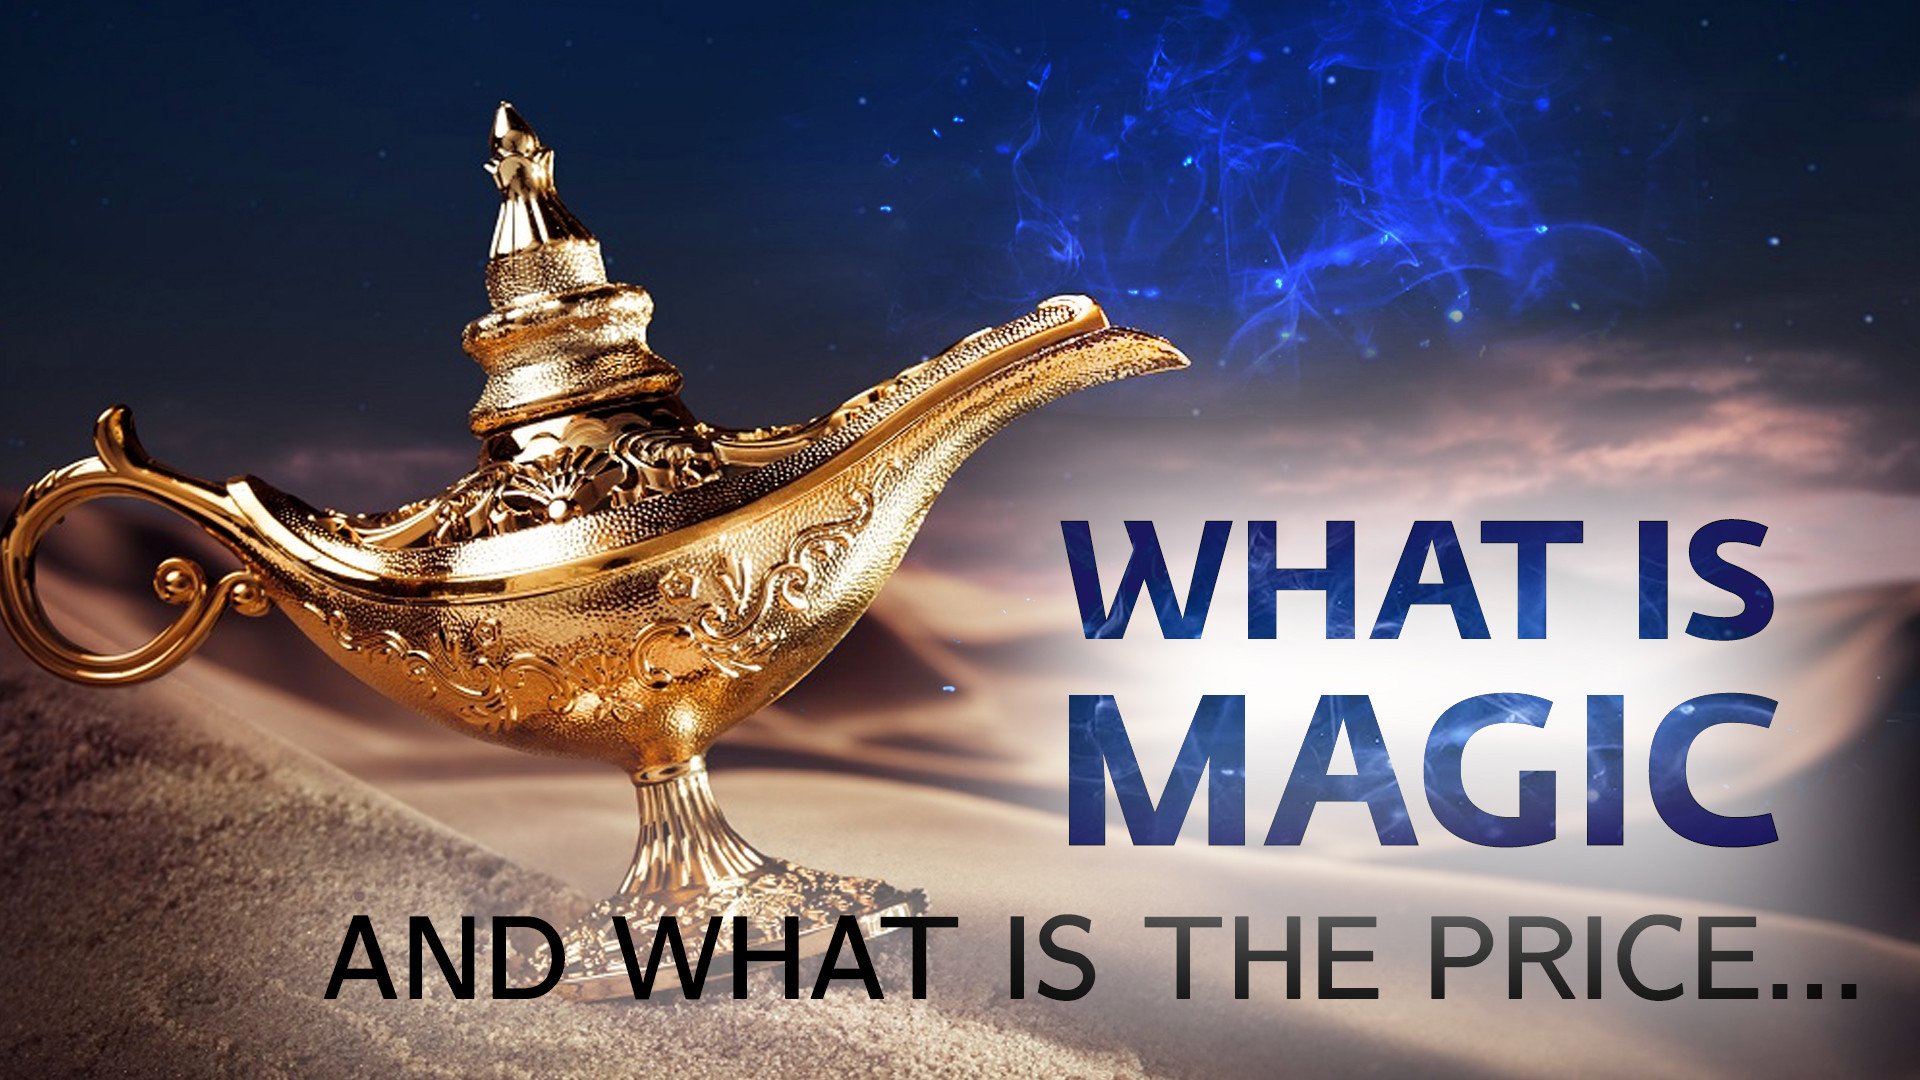 What Is Practical Magic in a Person’s Daily Life? And What Is the Price...